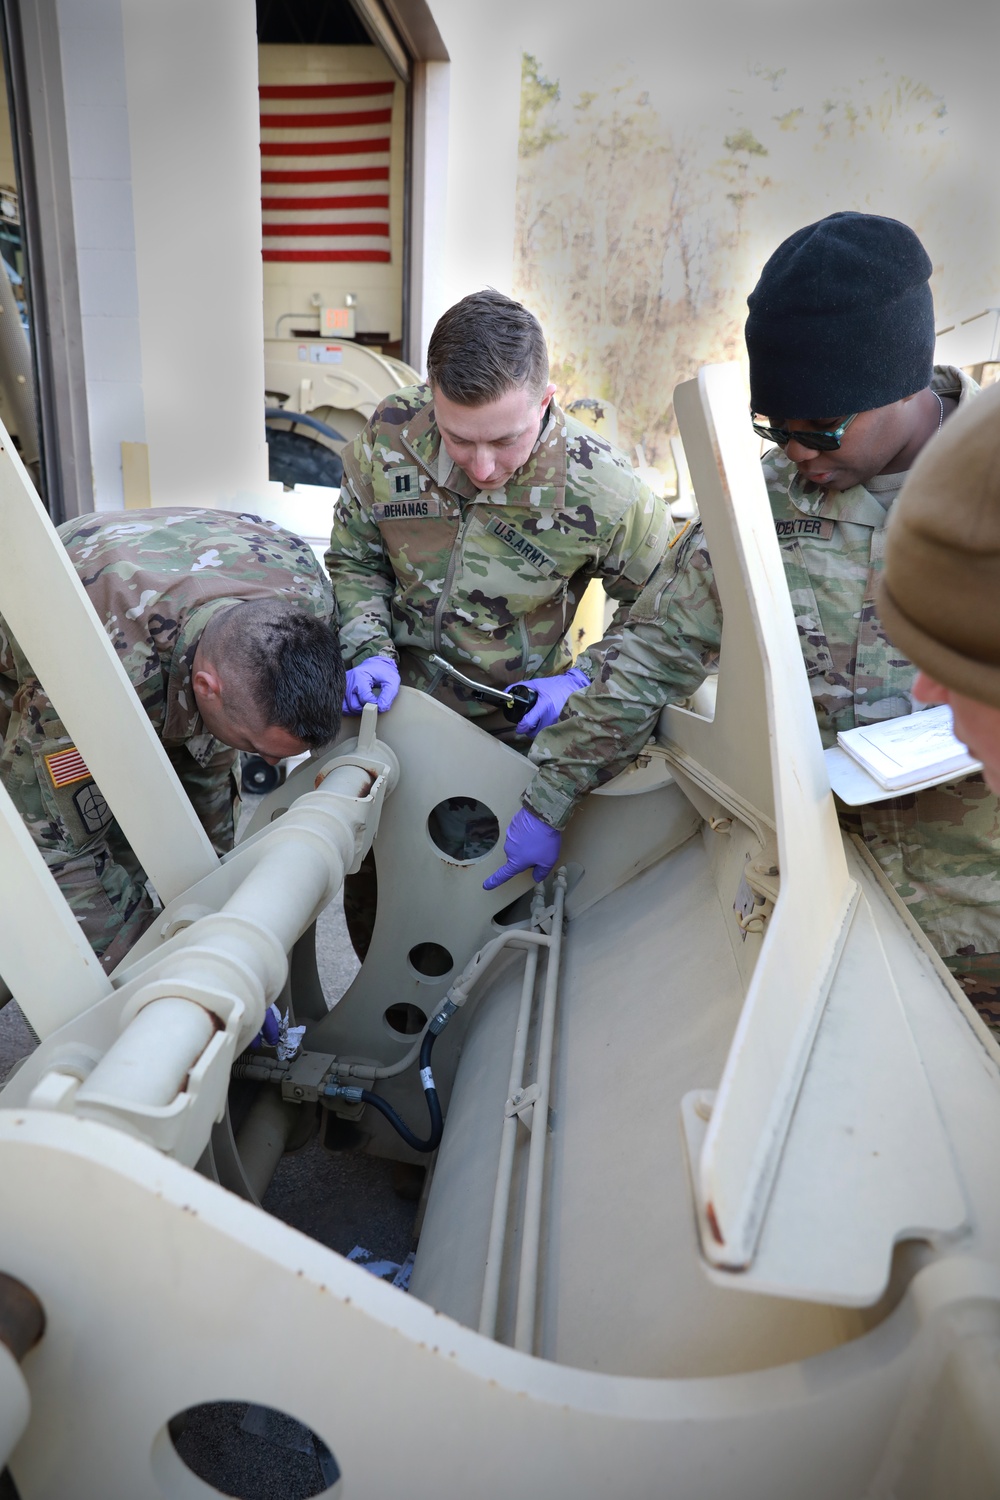 Functional Command and Readiness Division Team Up to Support Overall Readiness